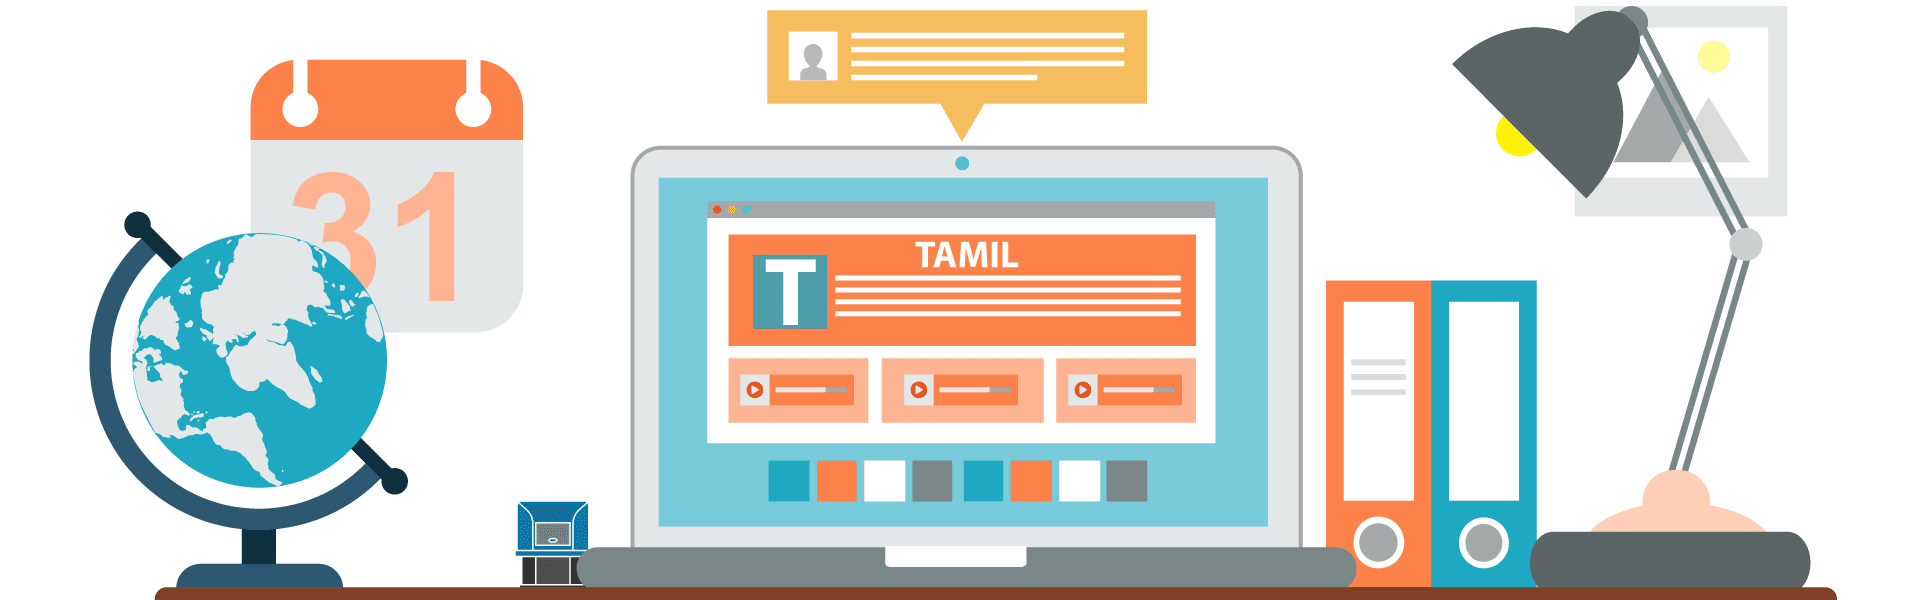 reunion translate to tamil from english voice